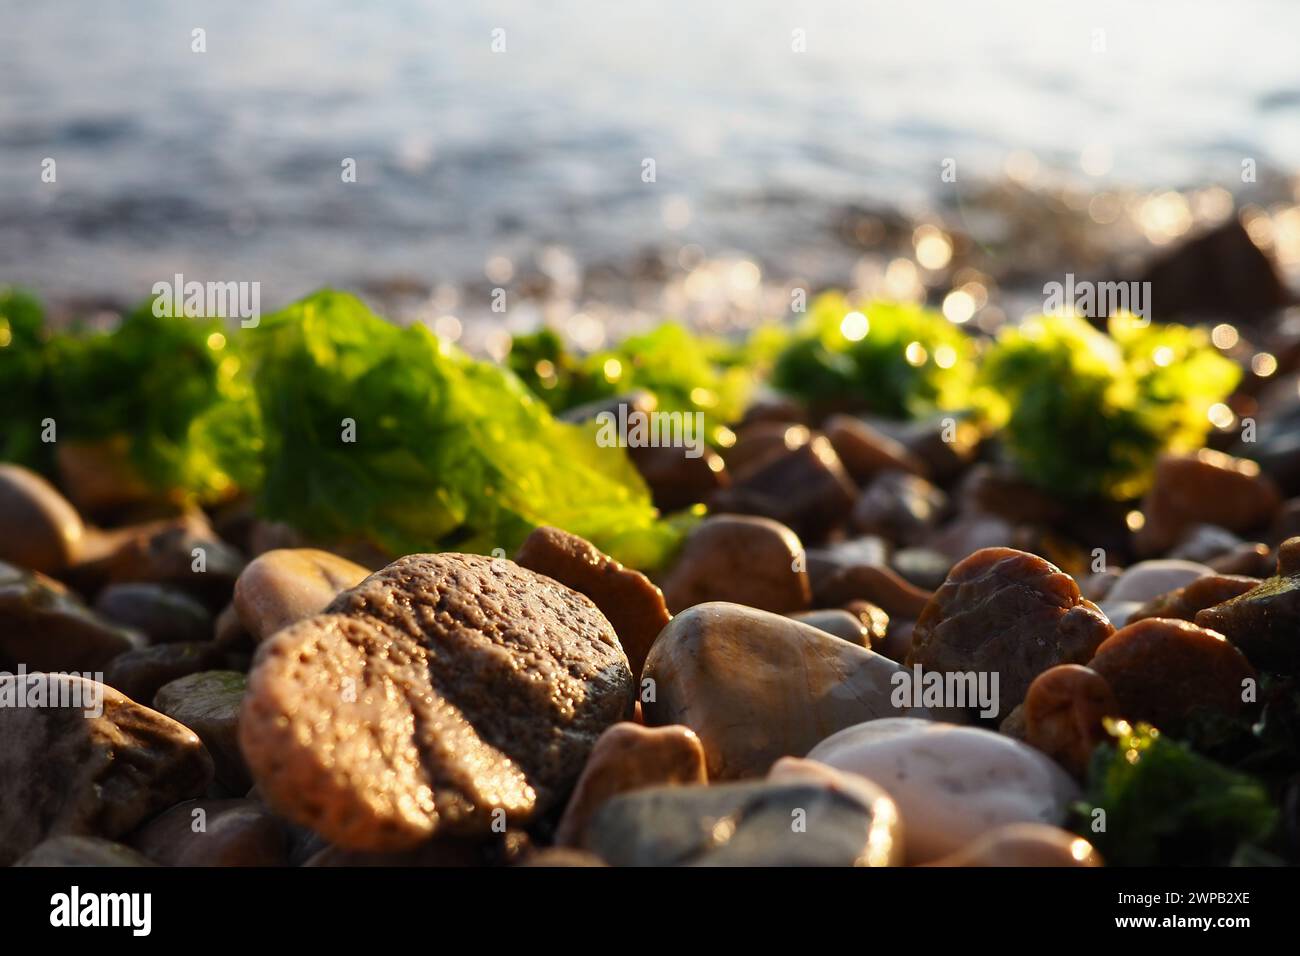 Stones on the beach. Algae are thrown onto the pebbles by a wave. Ulva, a genus of marine green algae of the Ulvaceae family. Sea lettuce. Montenegro Stock Photo